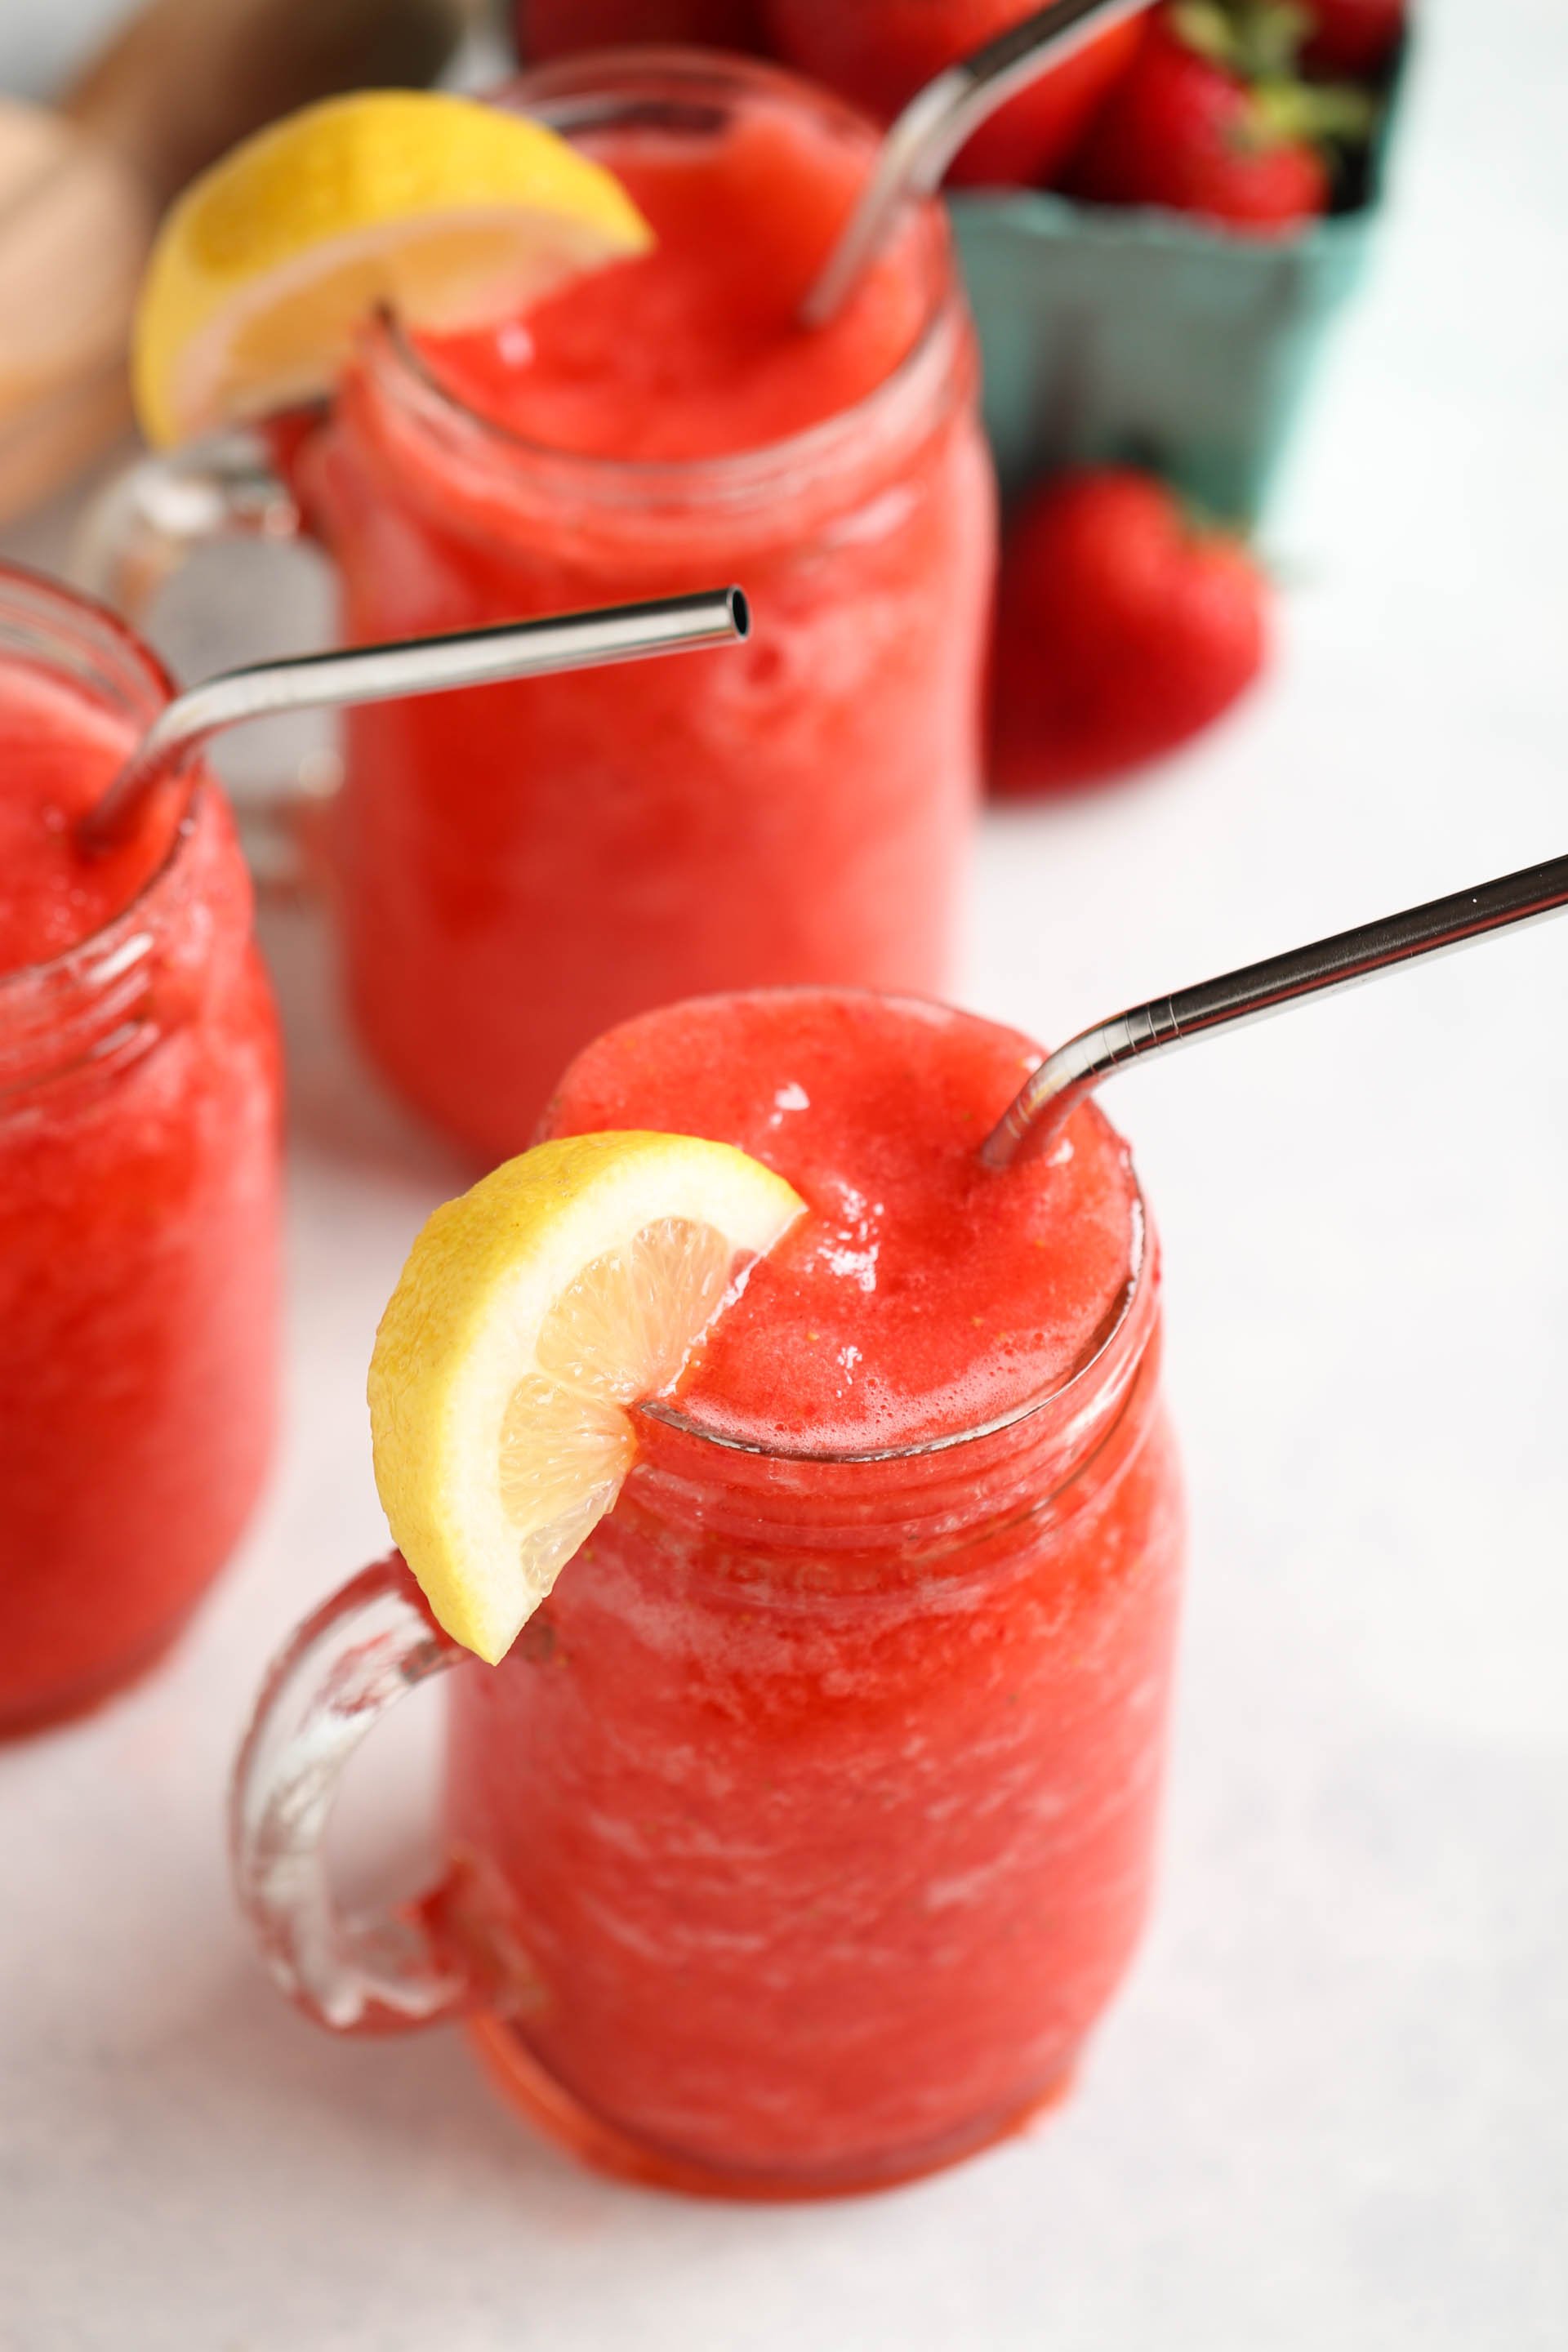 Copycat Lemonberry Slush in jars with handles and a metal straw